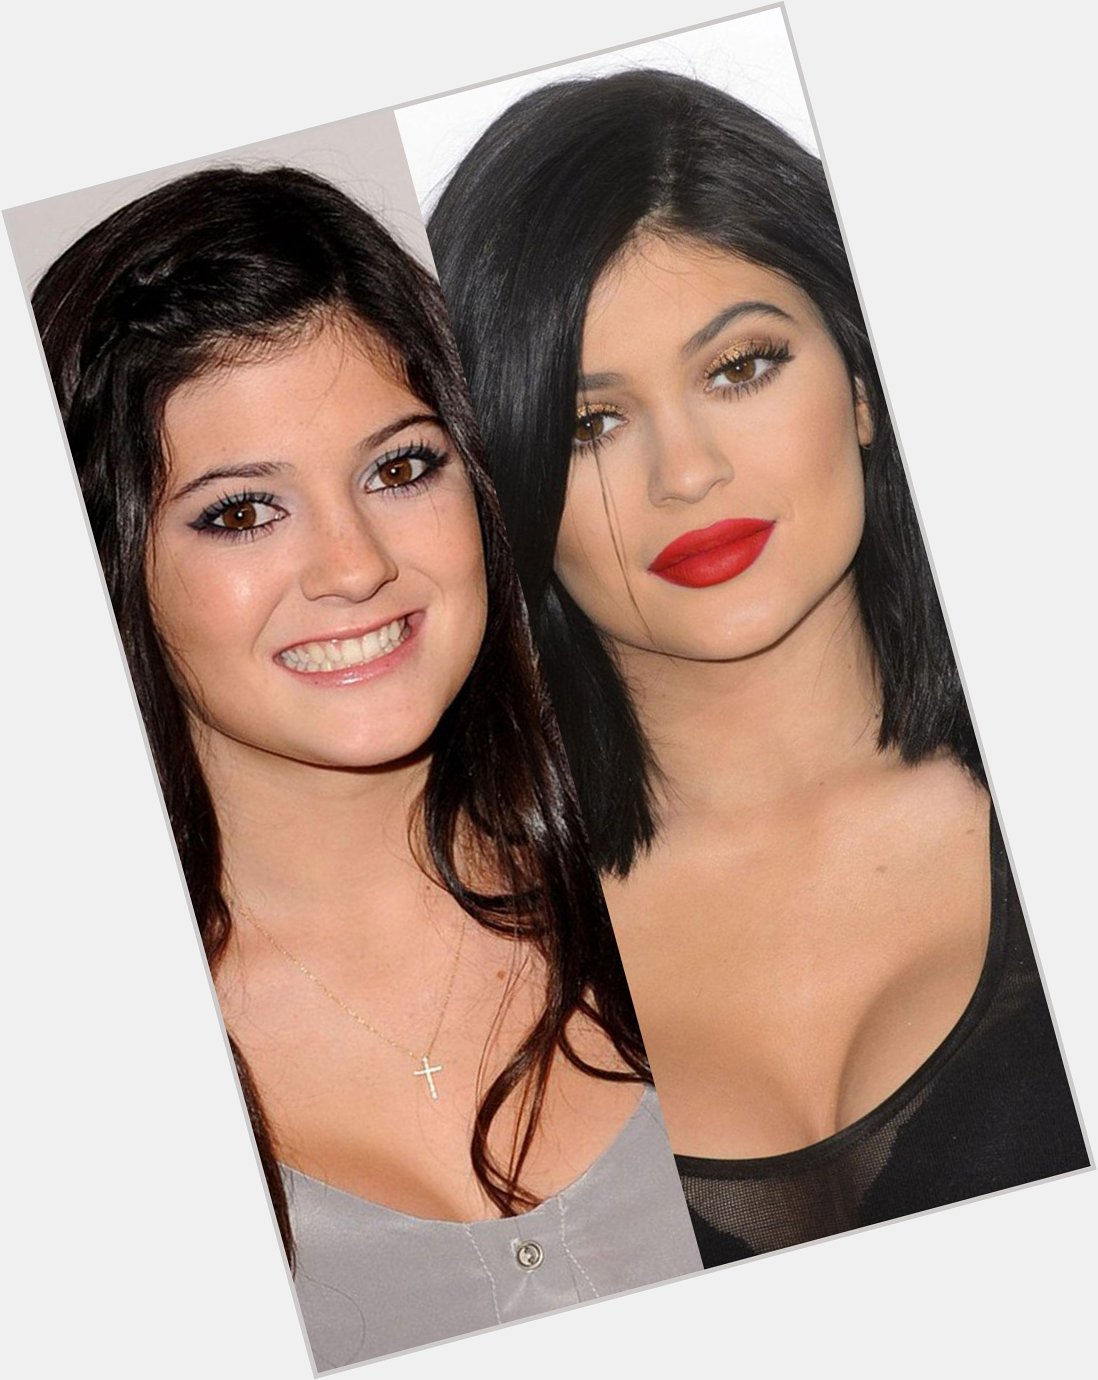 Happy 18th Birthday to Kylie Jenner!   Check out her beauty transformation:  